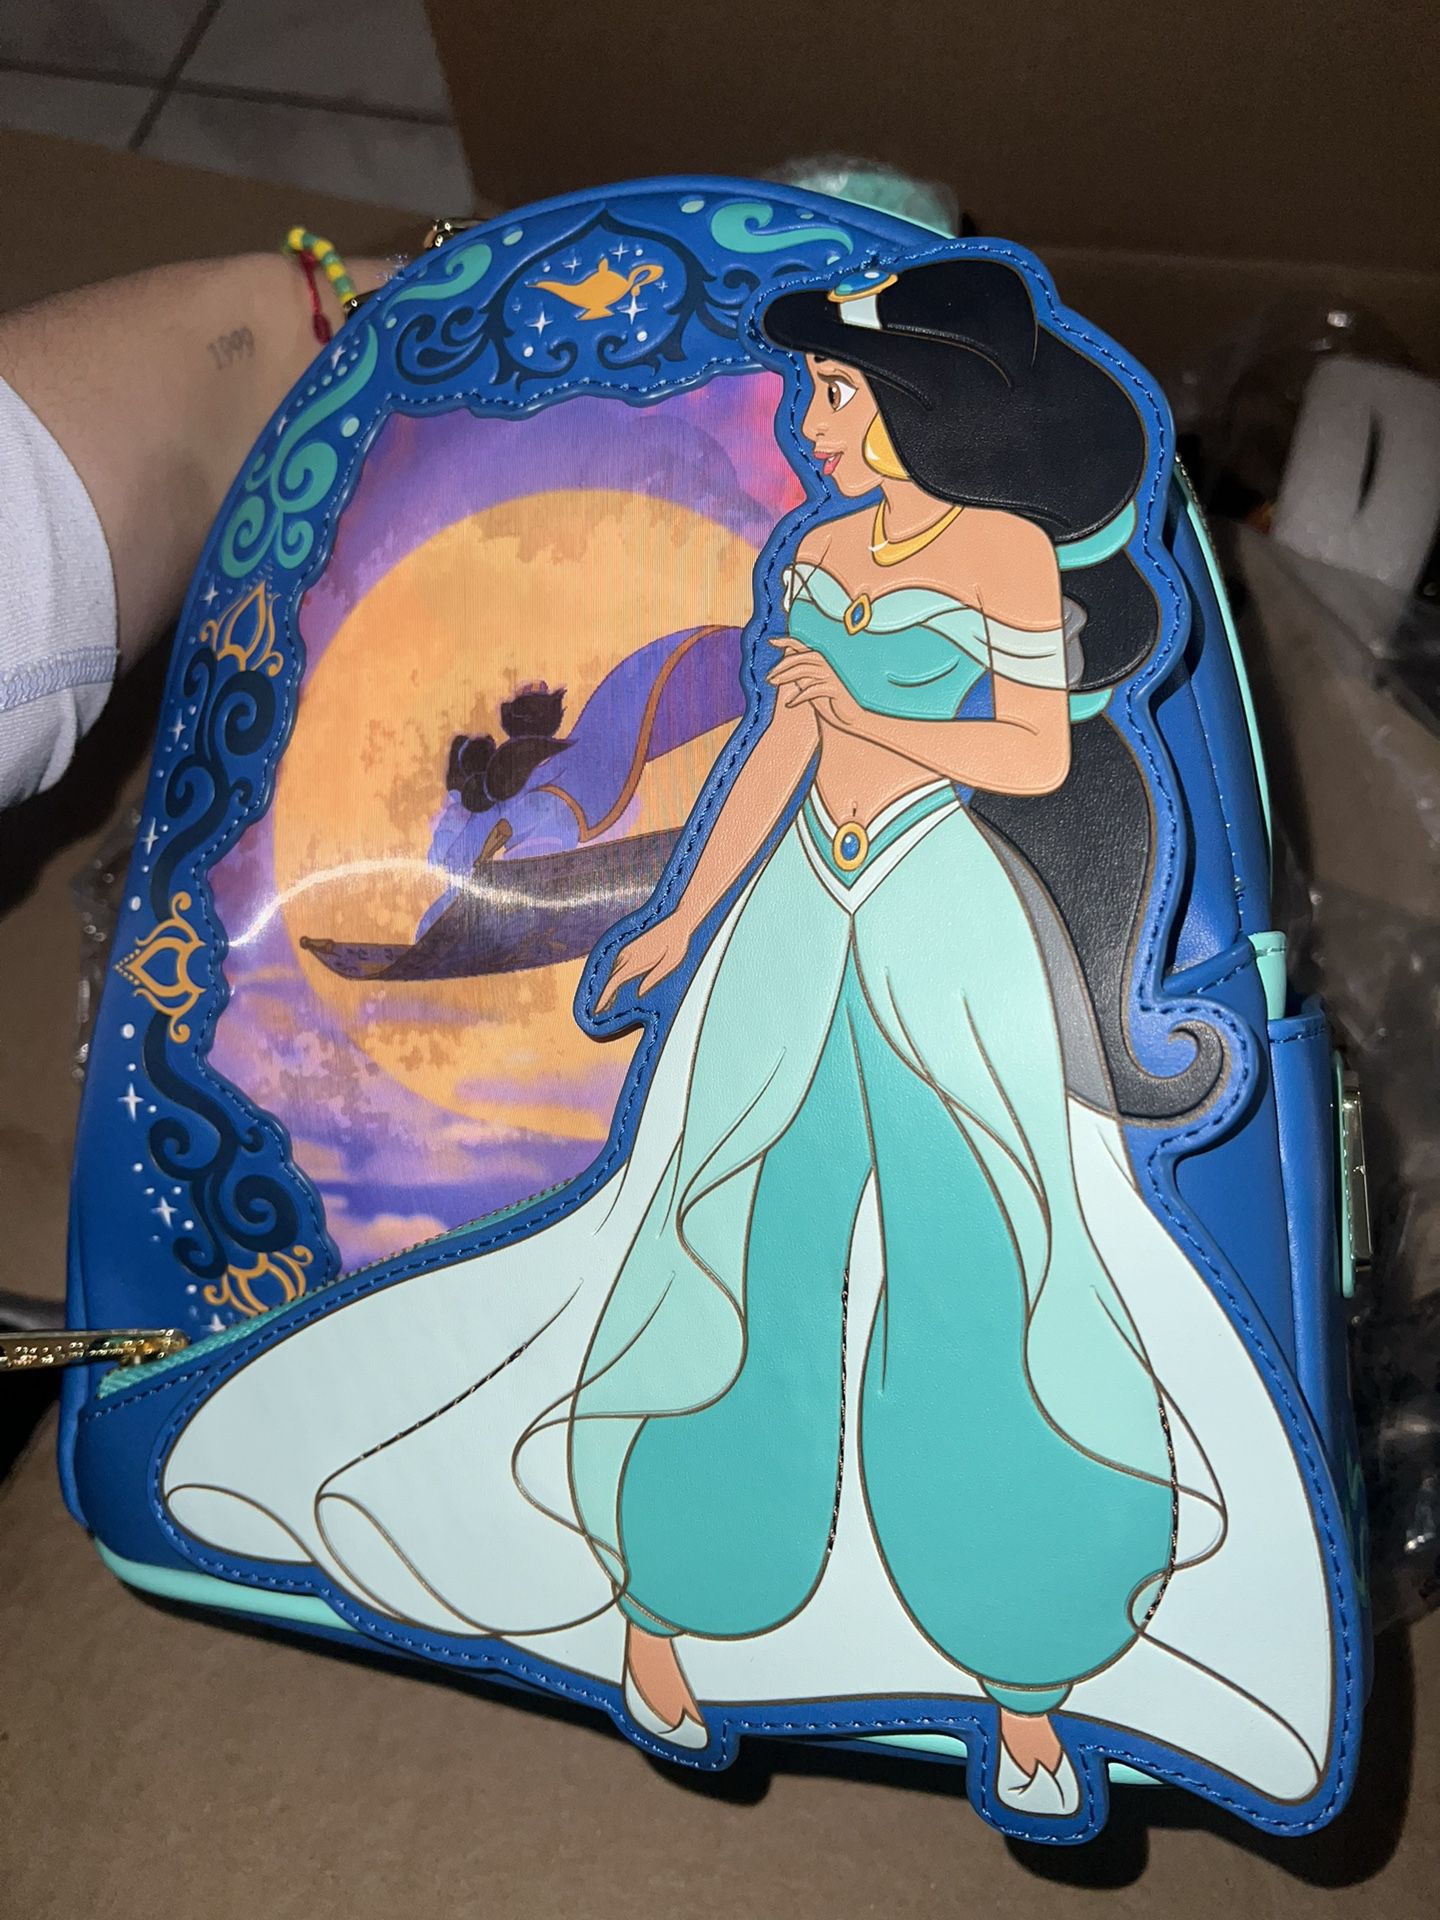 Disney Loungefly Backpack 